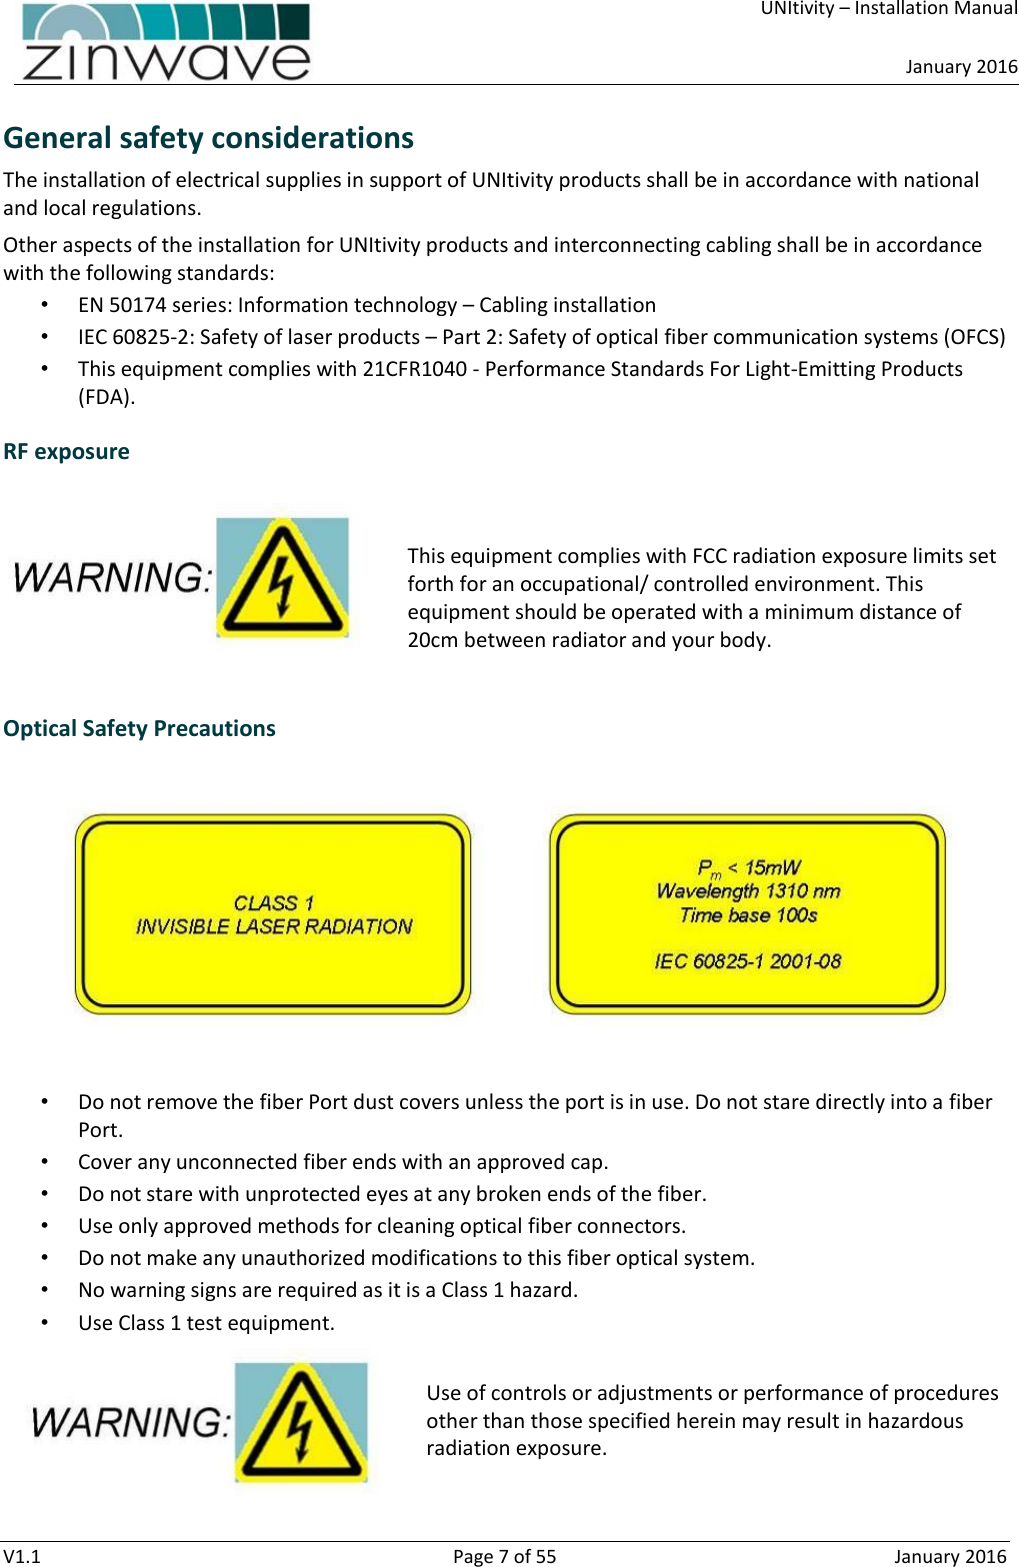     UNItivity – Installation Manual      January 2016  V1.1  Page 7 of 55  January 2016 General safety considerations The installation of electrical supplies in support of UNItivity products shall be in accordance with national and local regulations. Other aspects of the installation for UNItivity products and interconnecting cabling shall be in accordance with the following standards: • EN 50174 series: Information technology – Cabling installation • IEC 60825-2: Safety of laser products – Part 2: Safety of optical fiber communication systems (OFCS) • This equipment complies with 21CFR1040 - Performance Standards For Light-Emitting Products (FDA). RF exposure   This equipment complies with FCC radiation exposure limits set forth for an occupational/ controlled environment. This equipment should be operated with a minimum distance of 20cm between radiator and your body.  Optical Safety Precautions  • Do not remove the fiber Port dust covers unless the port is in use. Do not stare directly into a fiber Port. • Cover any unconnected fiber ends with an approved cap. • Do not stare with unprotected eyes at any broken ends of the fiber. • Use only approved methods for cleaning optical fiber connectors. • Do not make any unauthorized modifications to this fiber optical system. • No warning signs are required as it is a Class 1 hazard. • Use Class 1 test equipment.  Use of controls or adjustments or performance of procedures other than those specified herein may result in hazardous radiation exposure.   